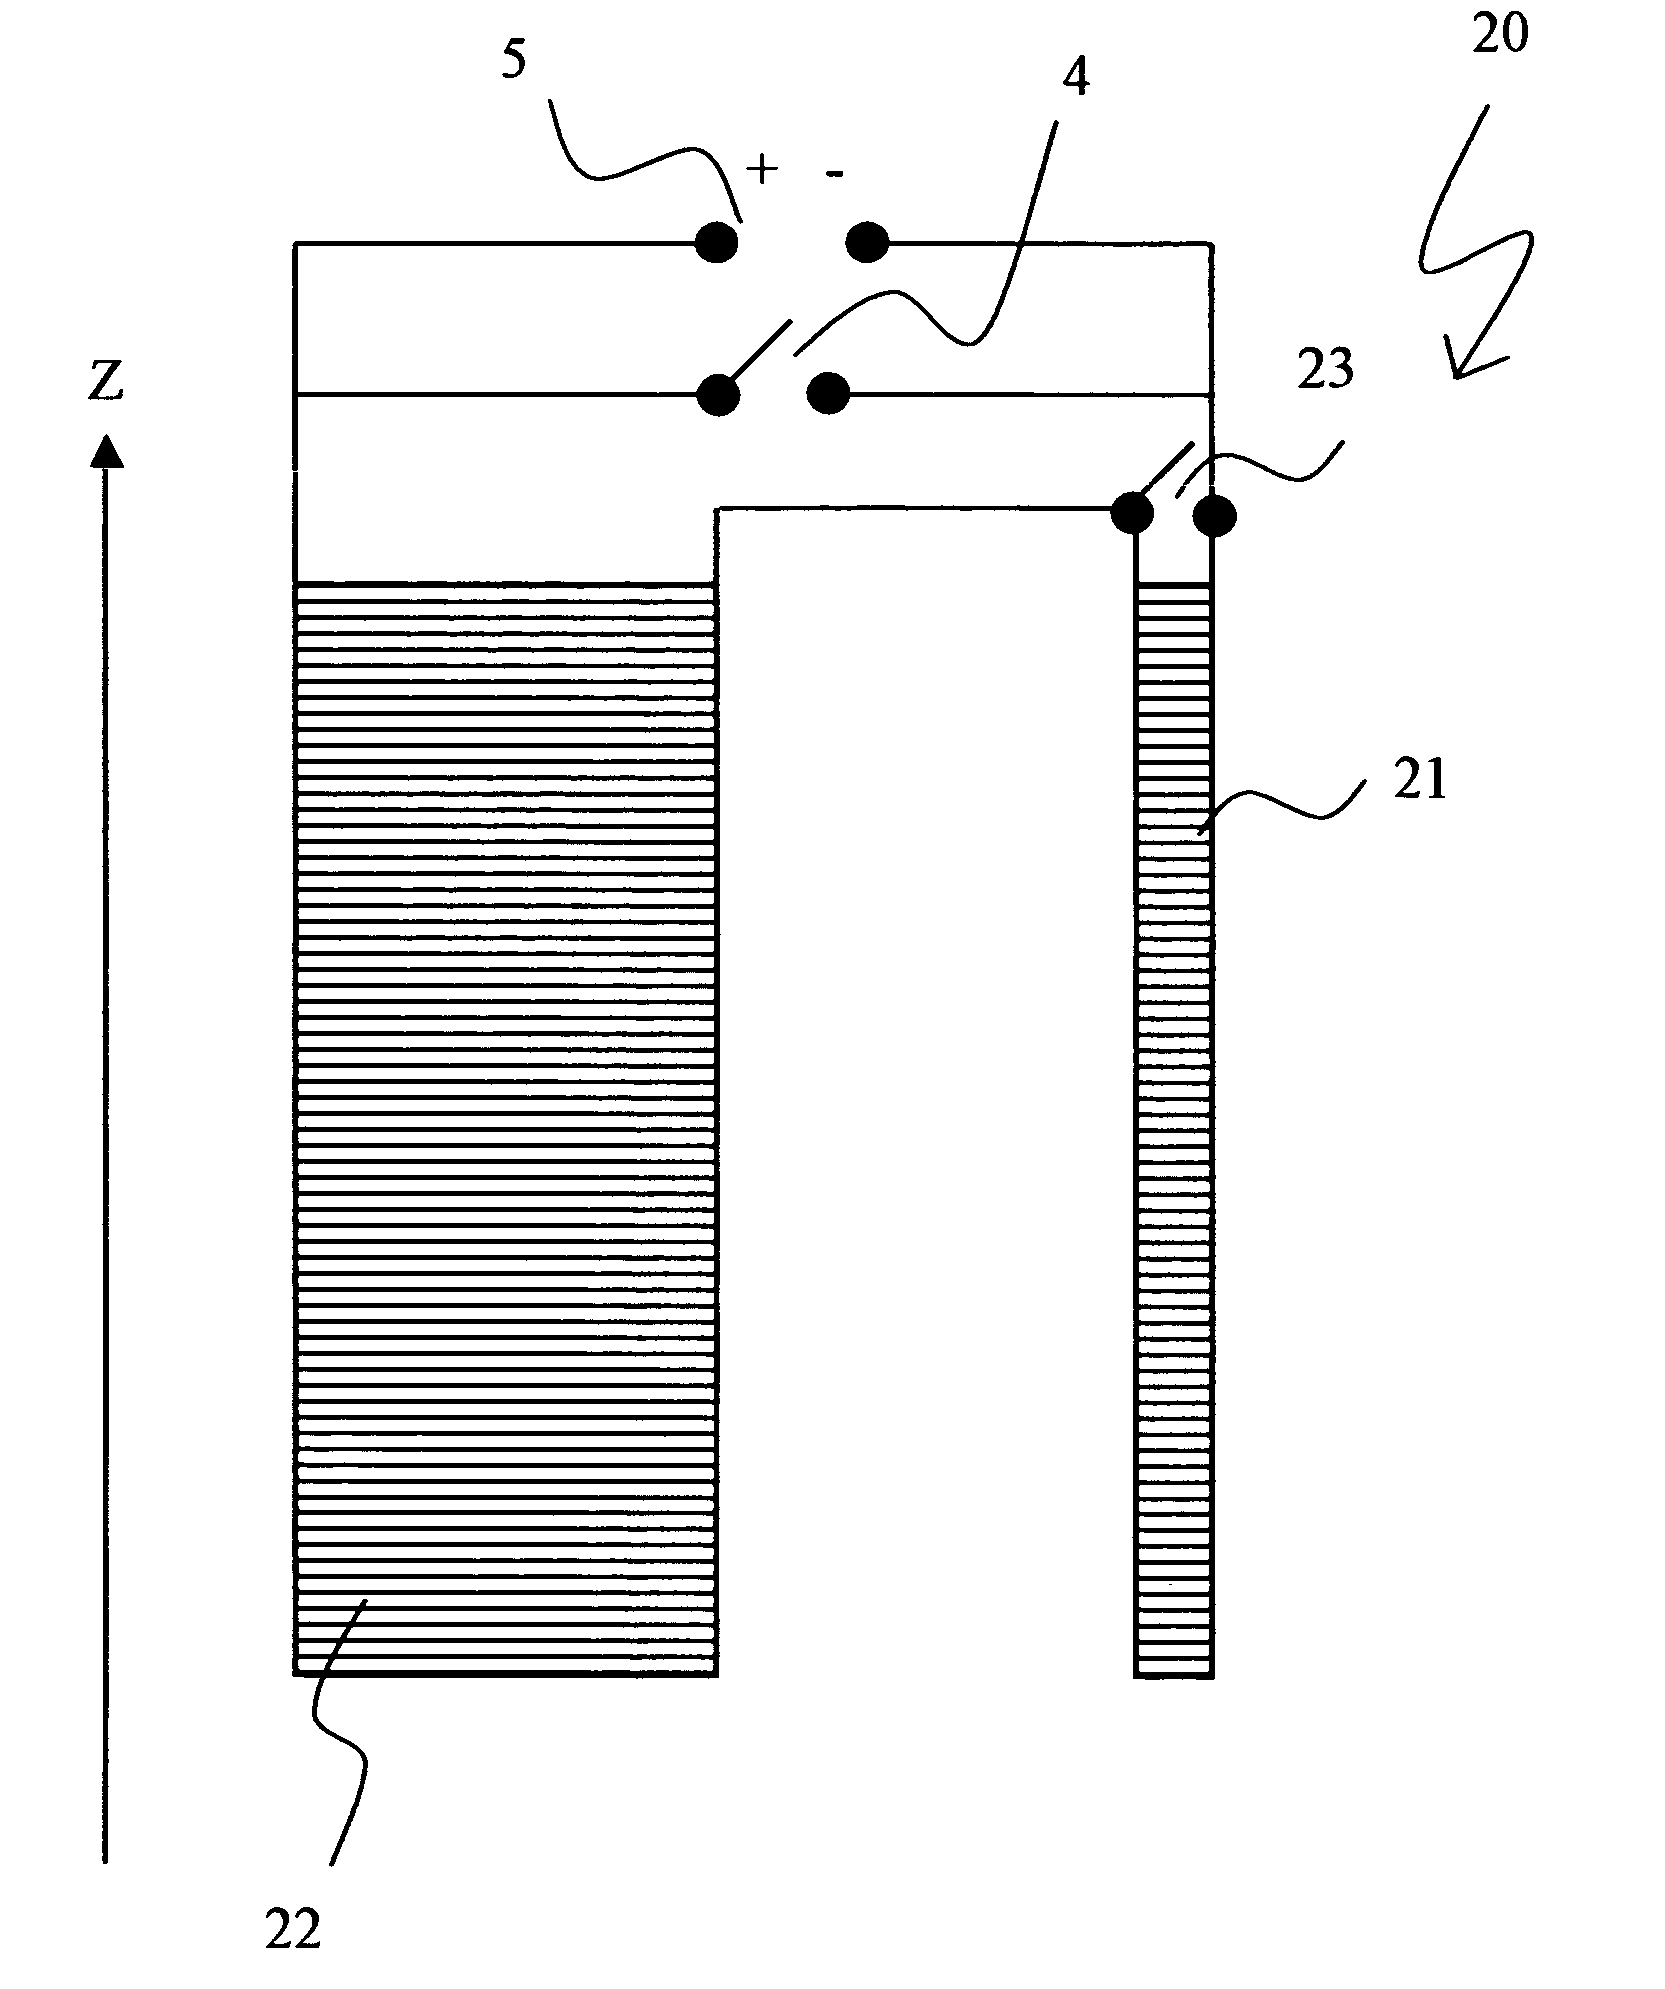 Method for fringe field compensation of an actively shielded superconducting nmr magnet